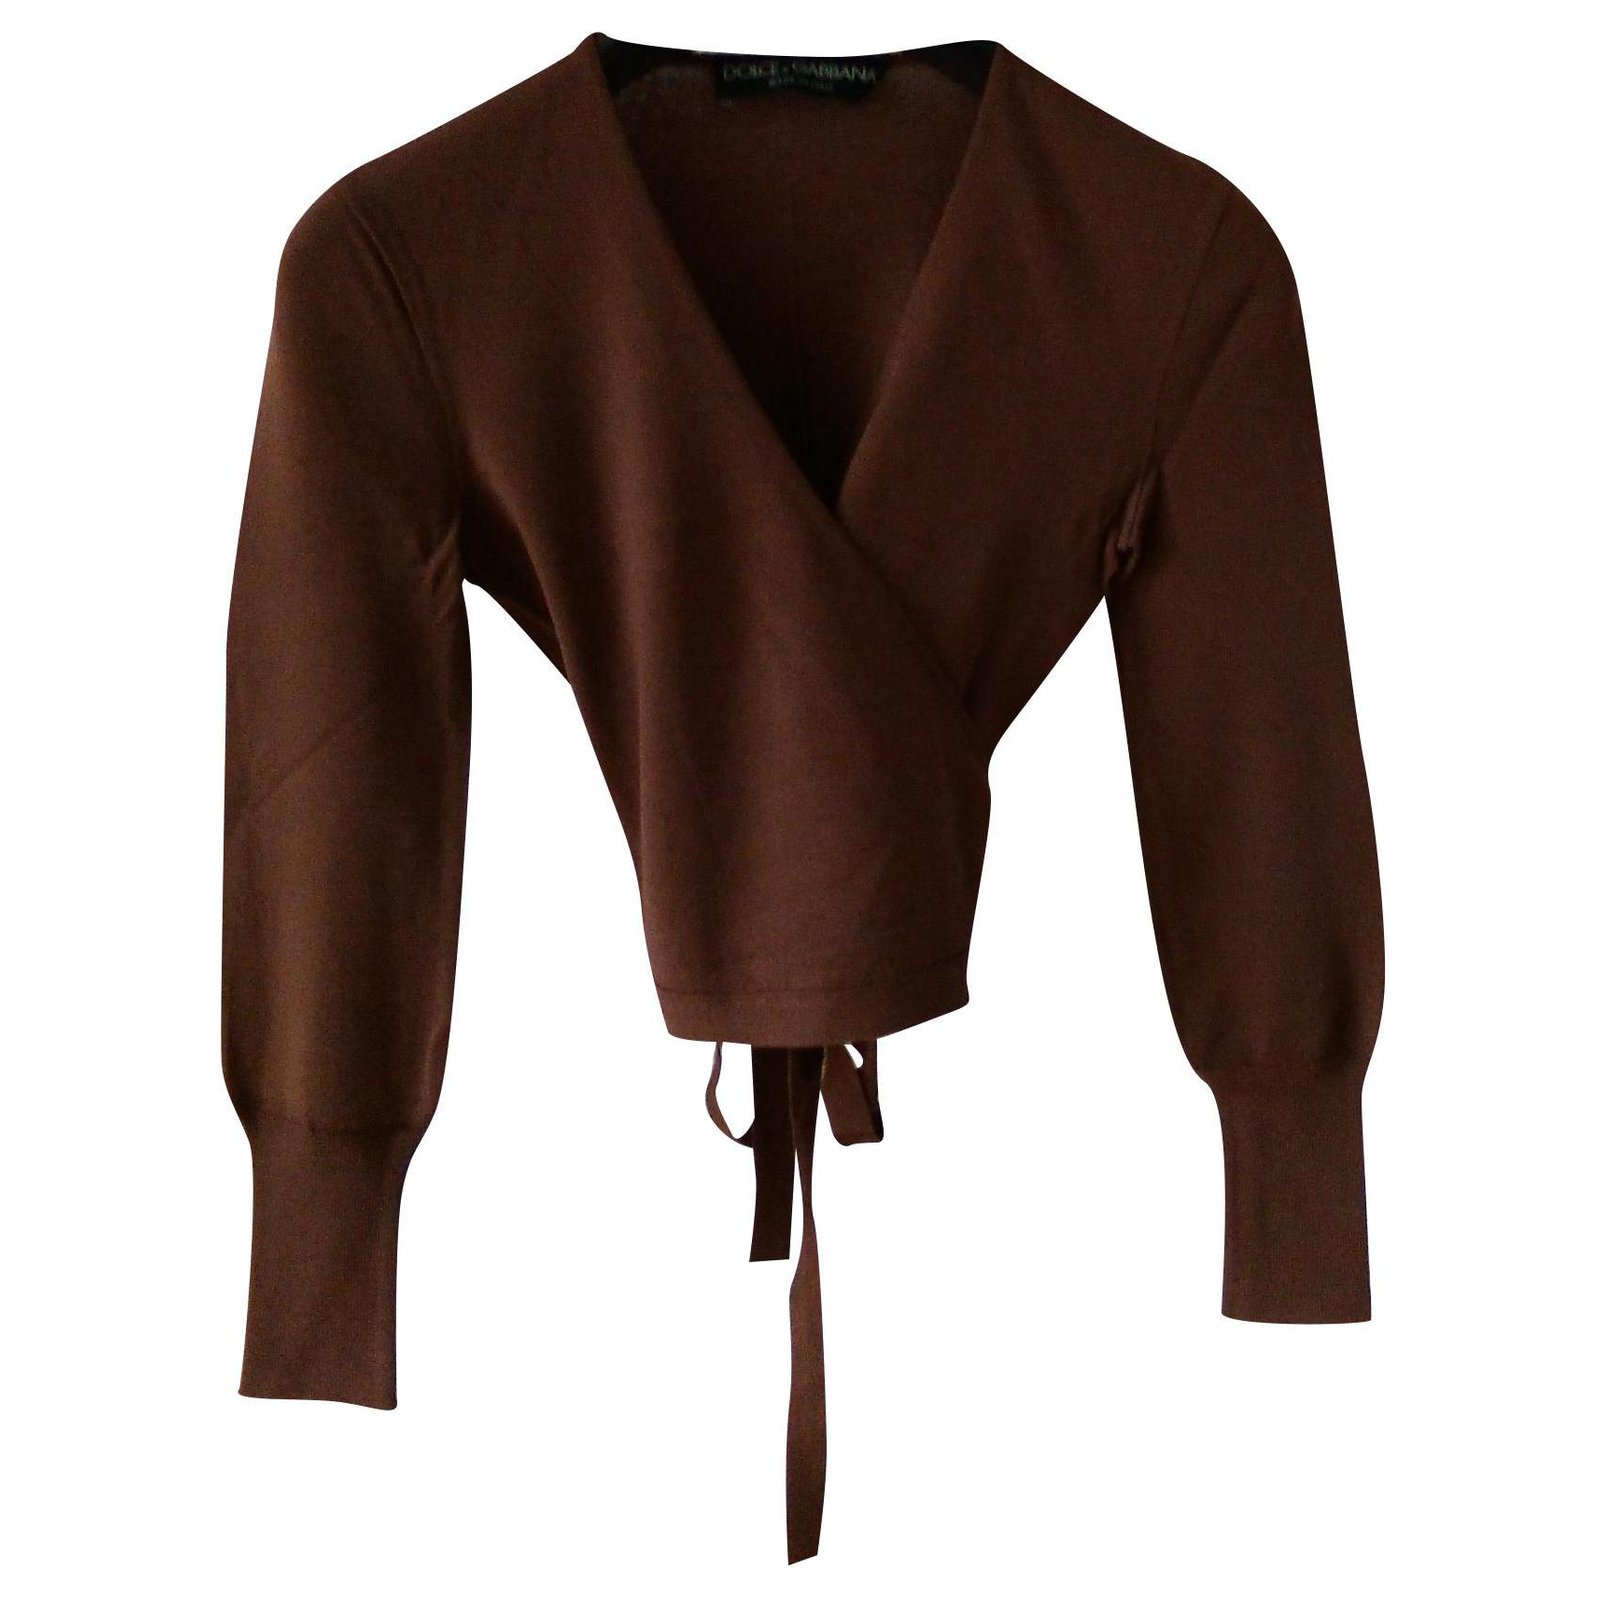 Dolce & Gabbana Virgin Wool Wrap Cardigan in Black Womens Jumpers and knitwear Dolce & Gabbana Jumpers and knitwear Brown 